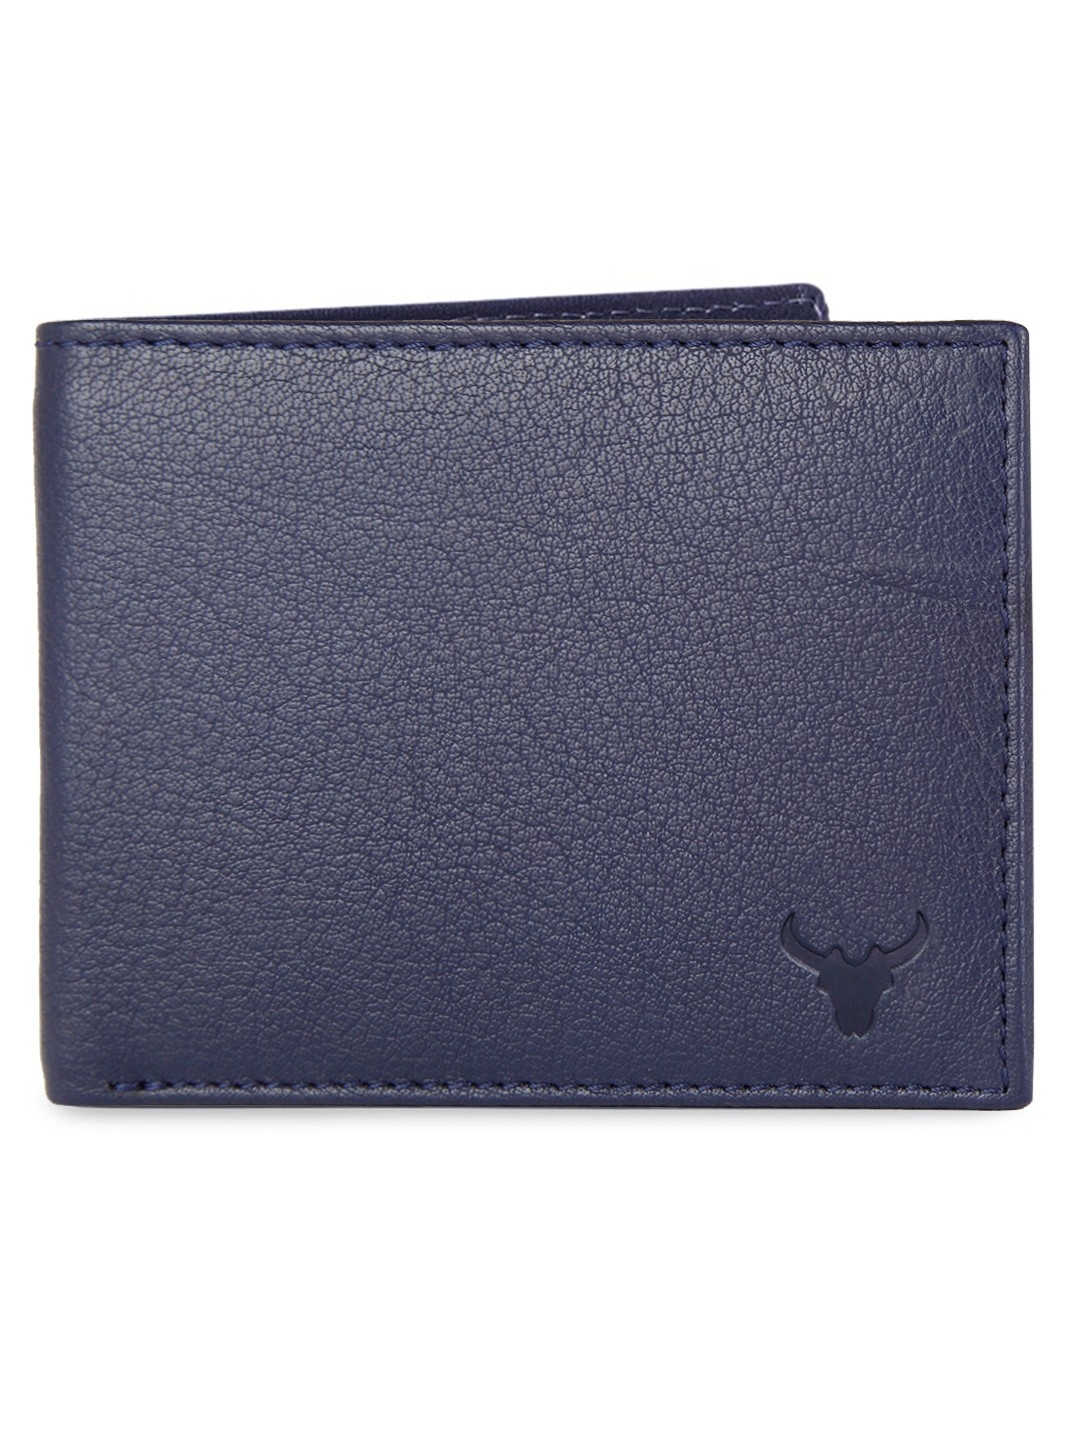 Napa Hide | Napa Hide RFID Protected Genuine High Quality Blue Leather Wallet For Men